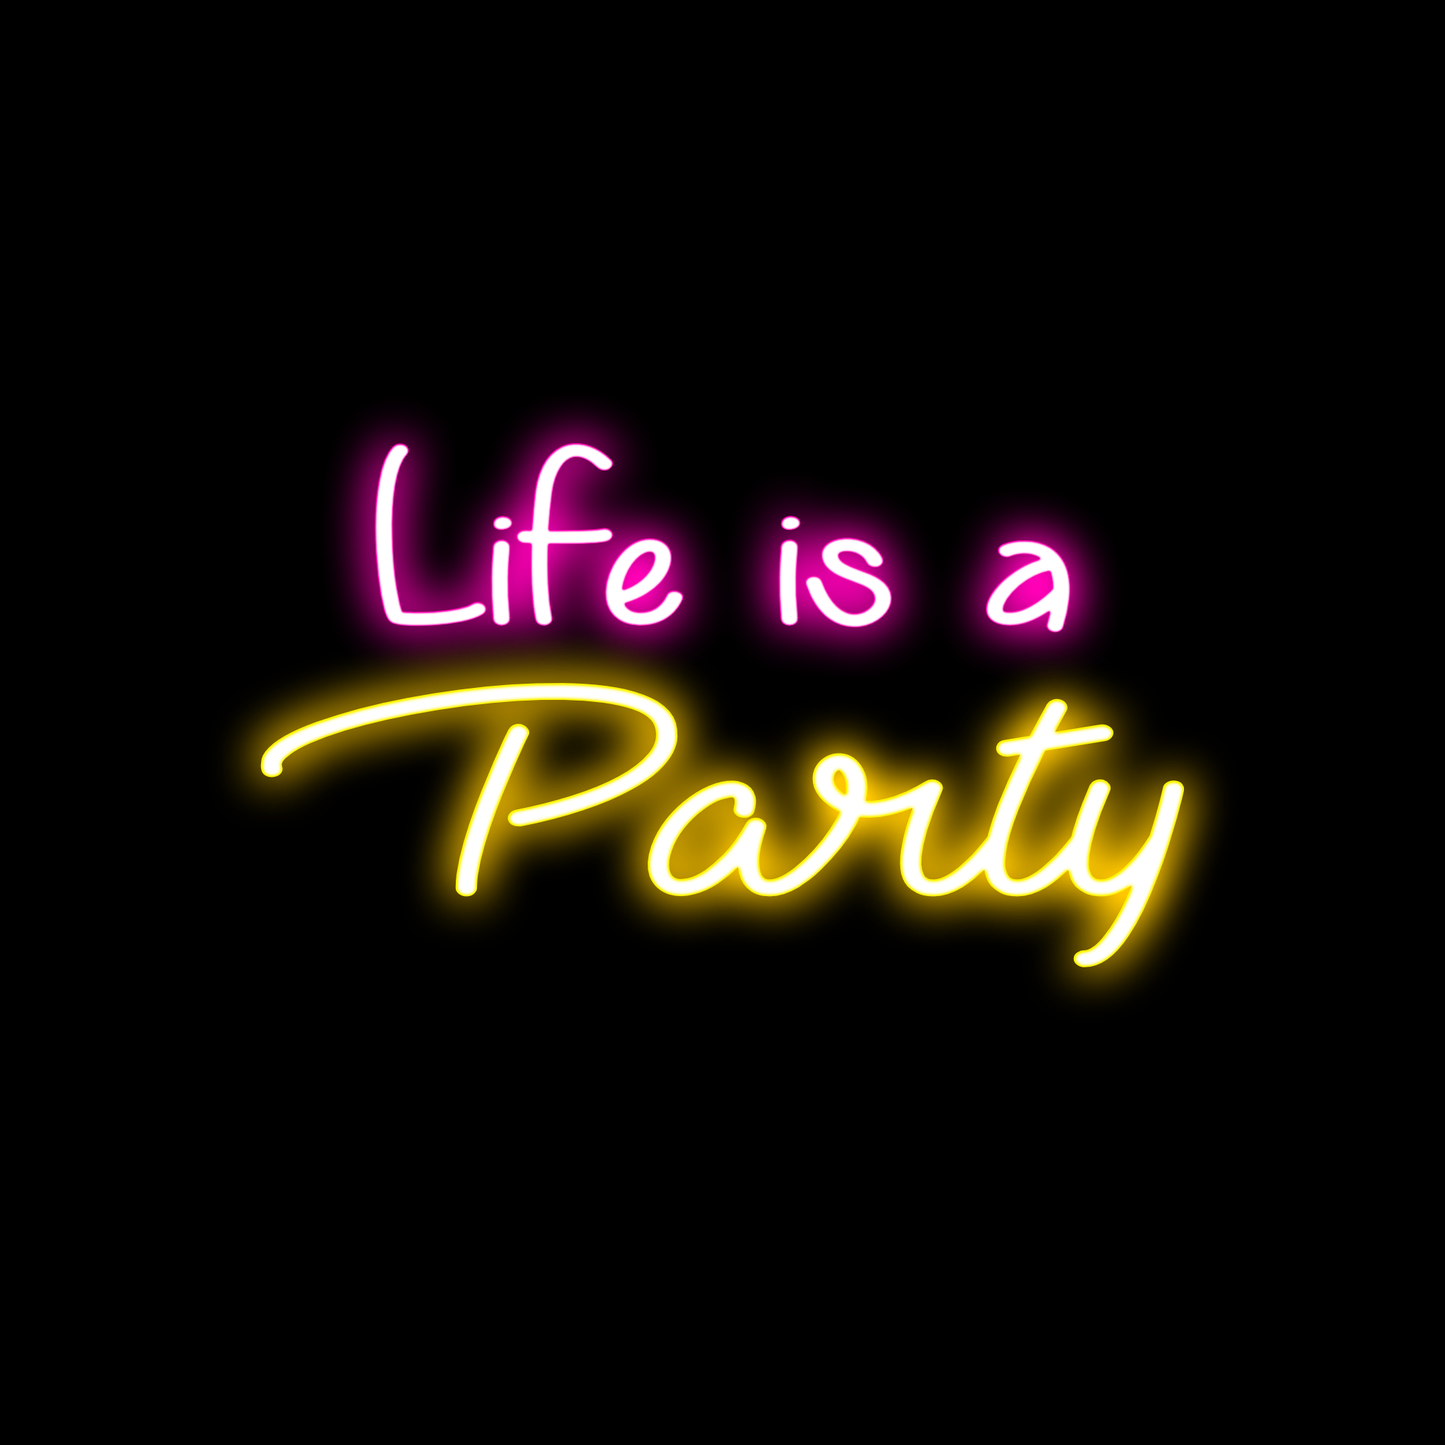 Life is a Party (bicolor)